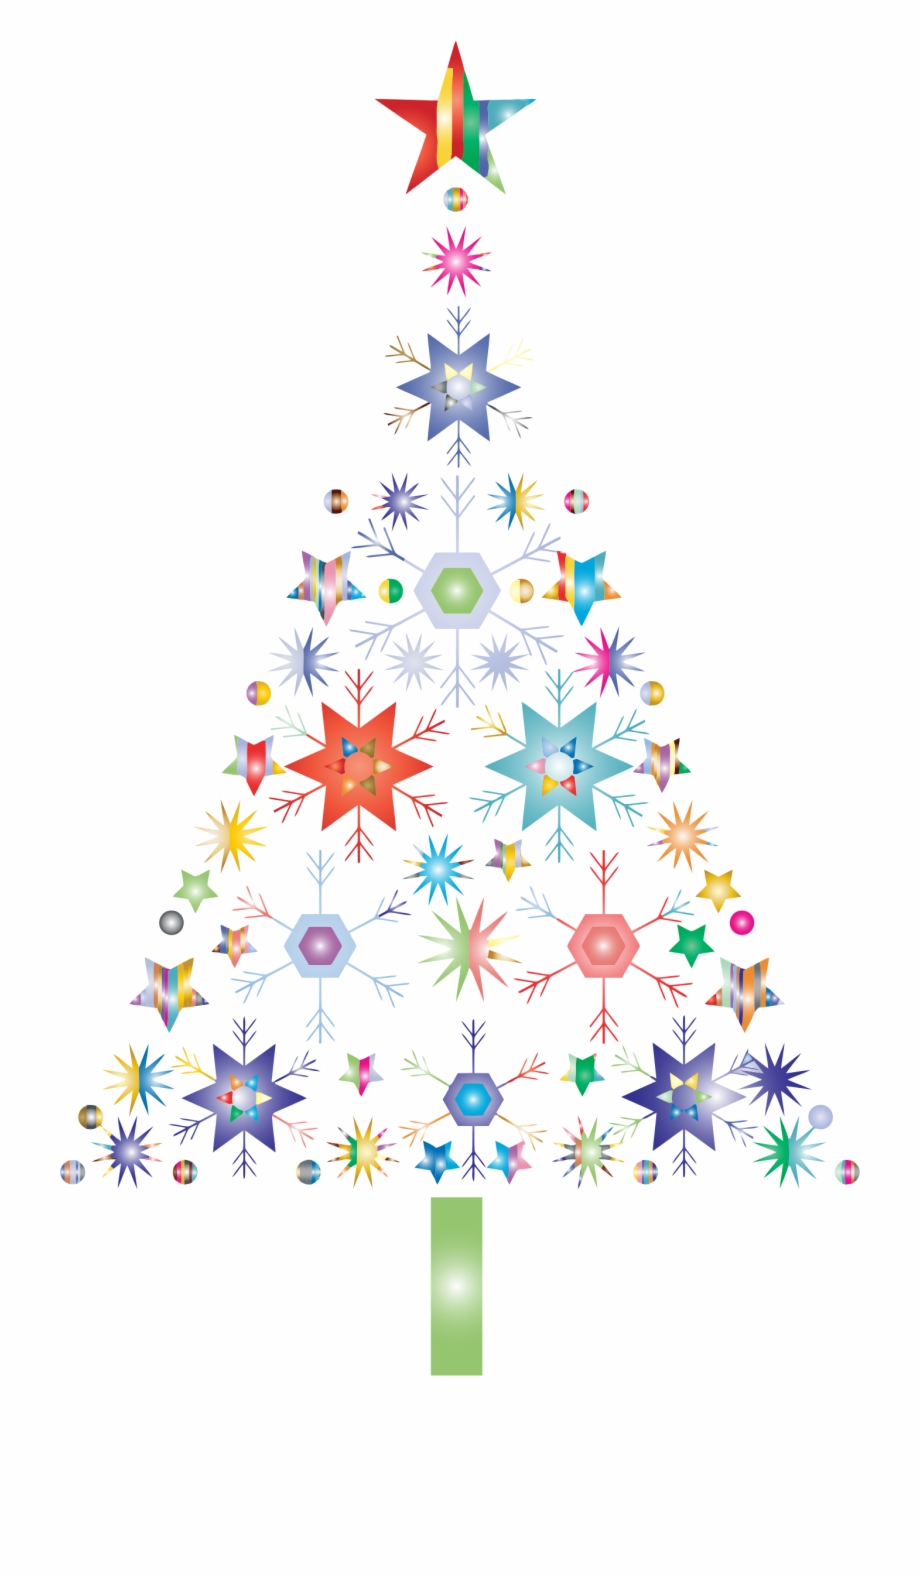 This Free Icons Png Design Of Abstract Snowflake